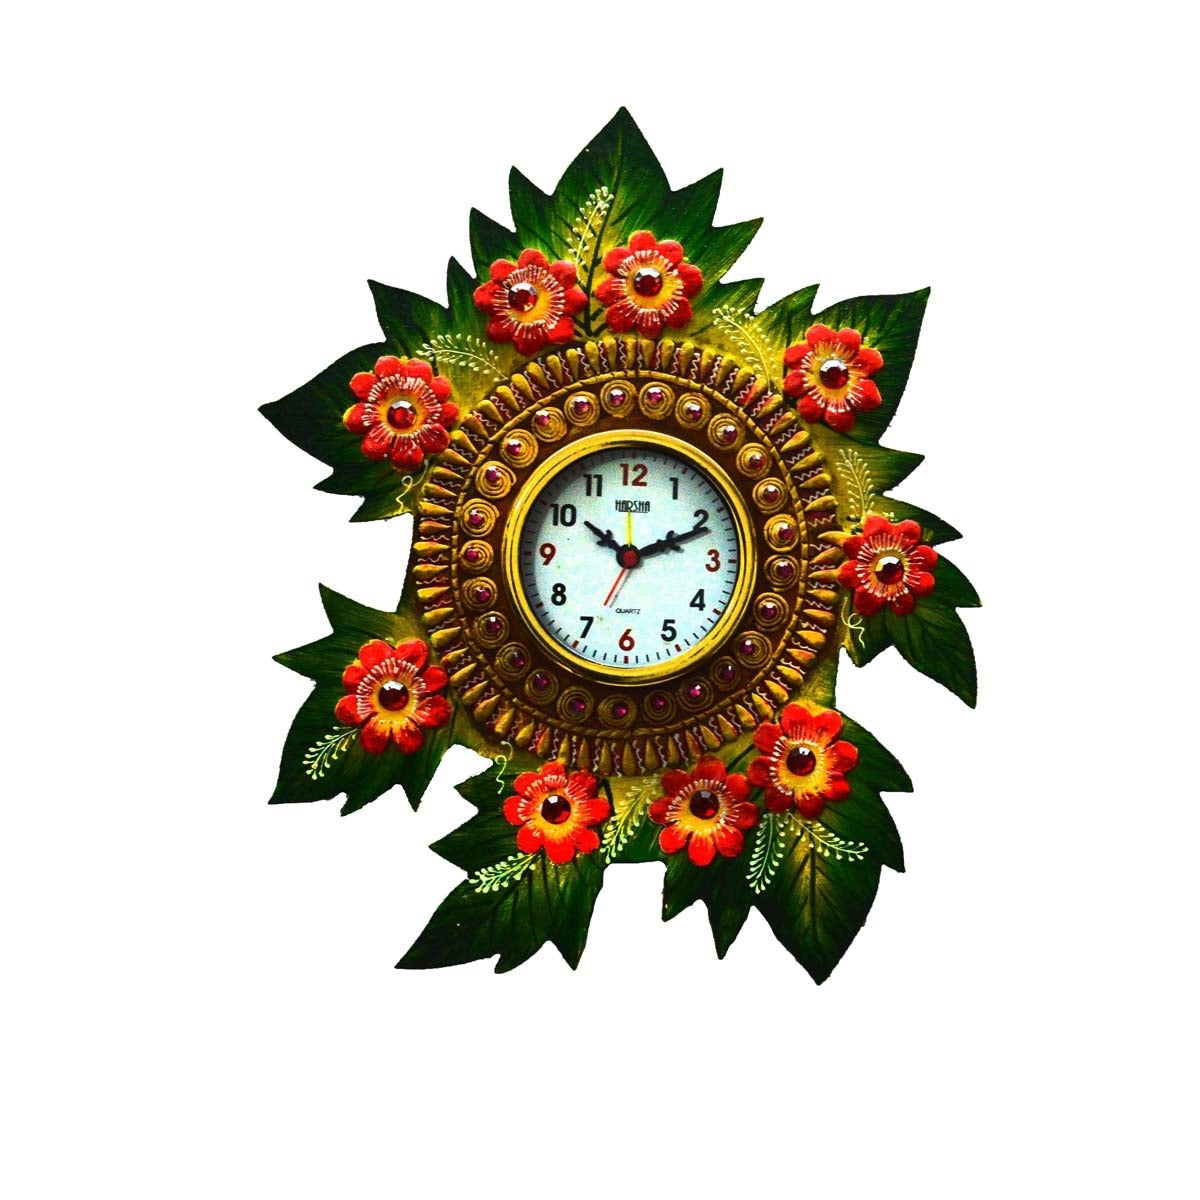 Papier-Mache Floral Handcrafted Wall Clock